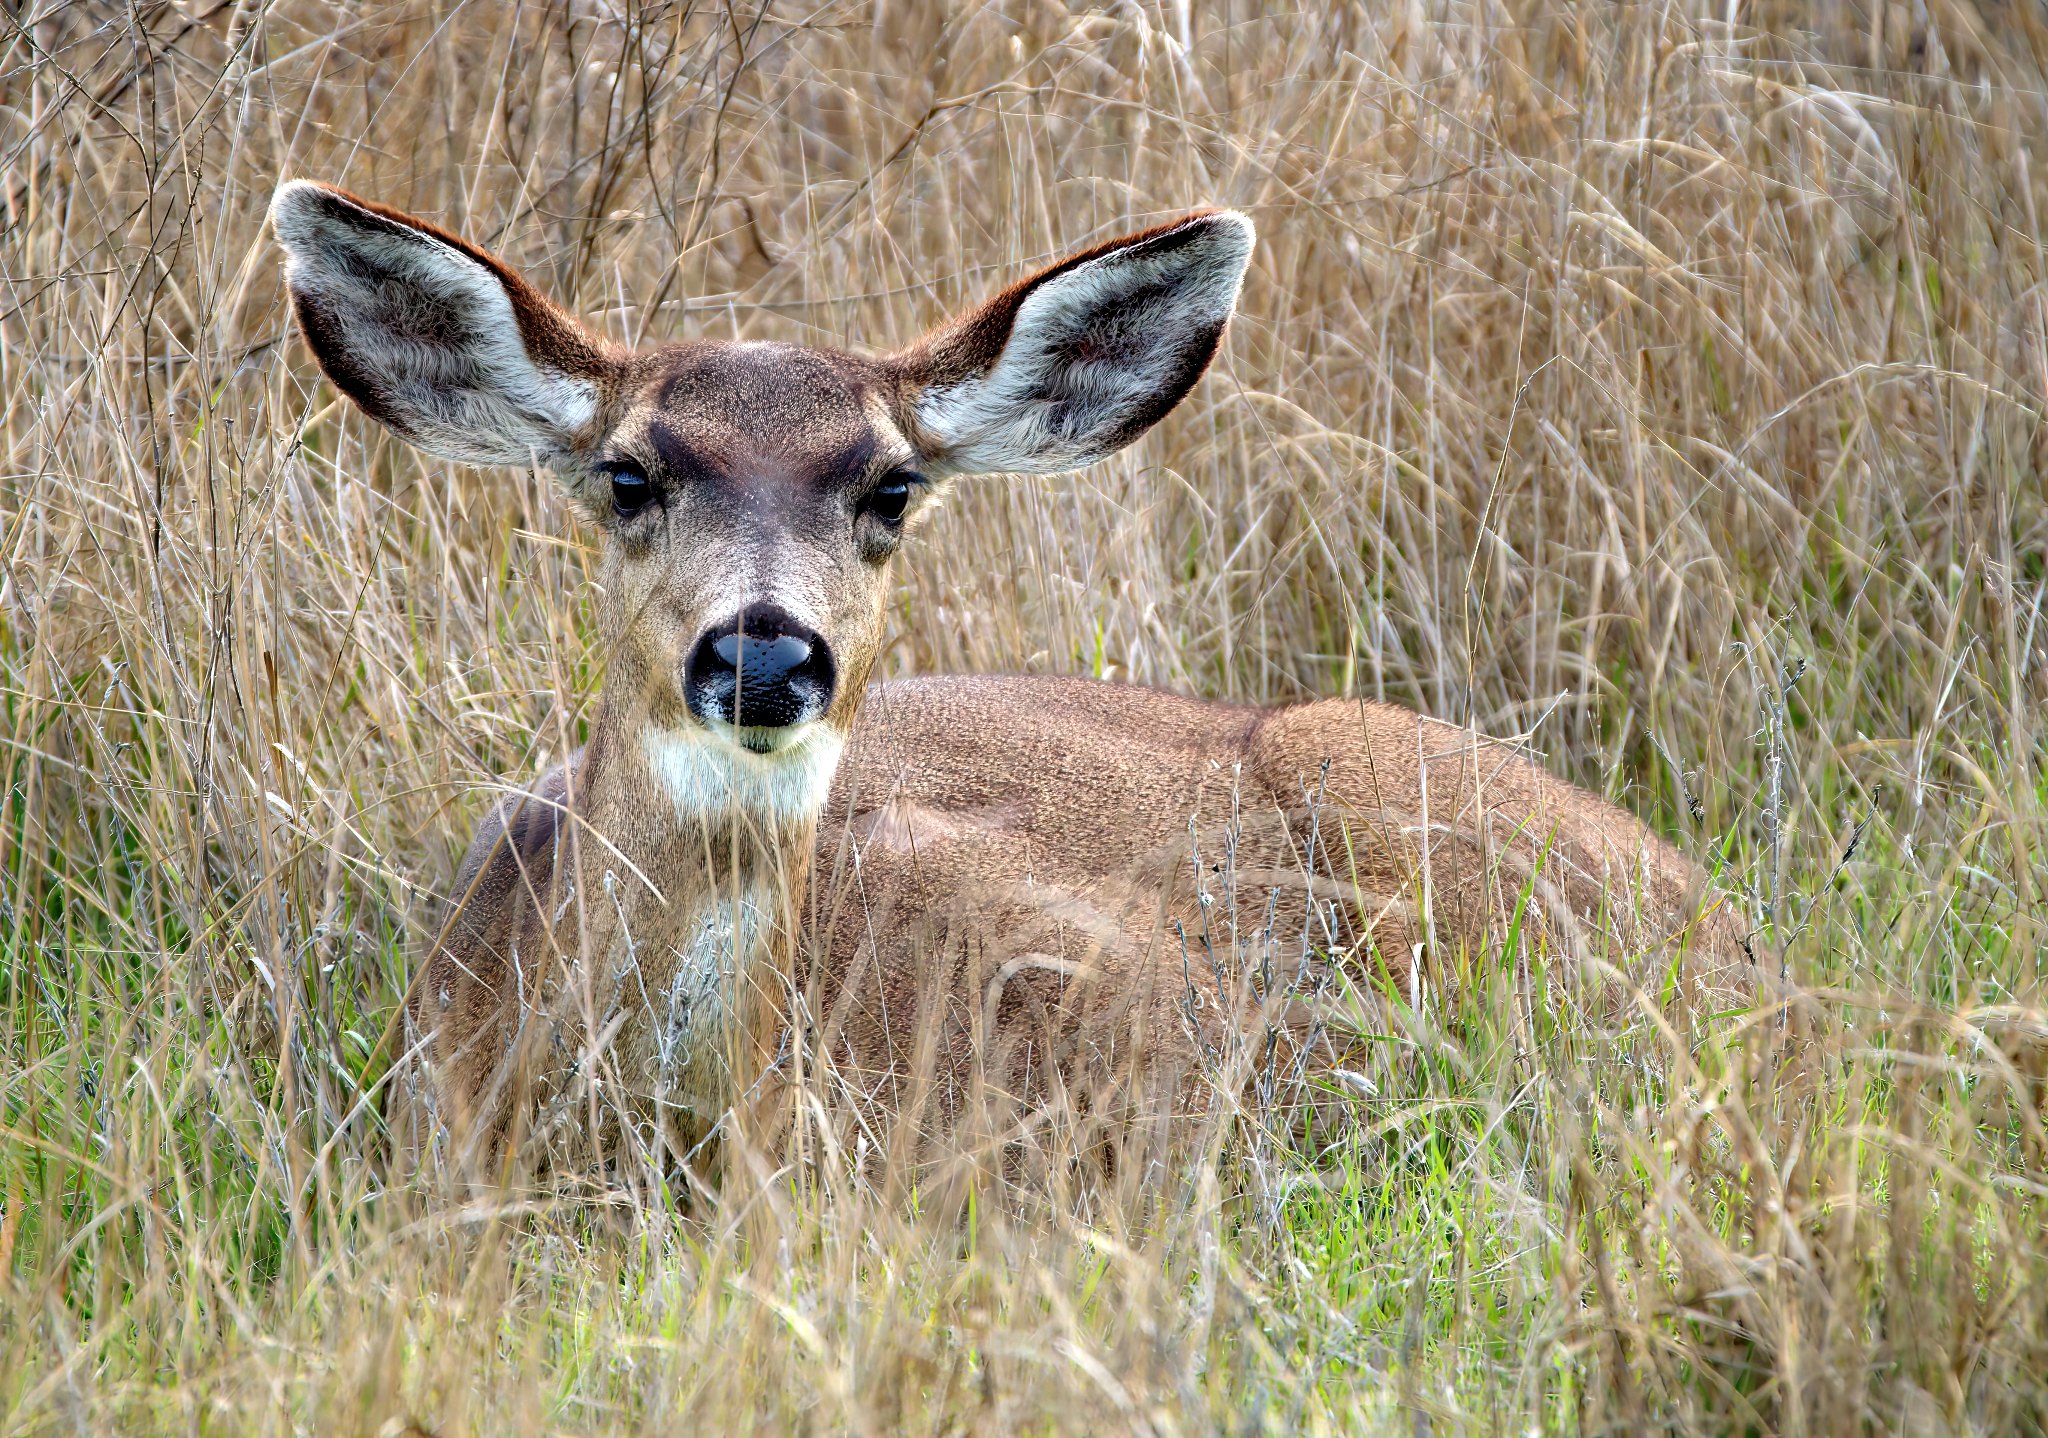 A brown deer with large ears lined in white, velvety fur lies down in green and brown grasses. Its nose is glossy and its looking directly at the camera with big, dark black eyes.